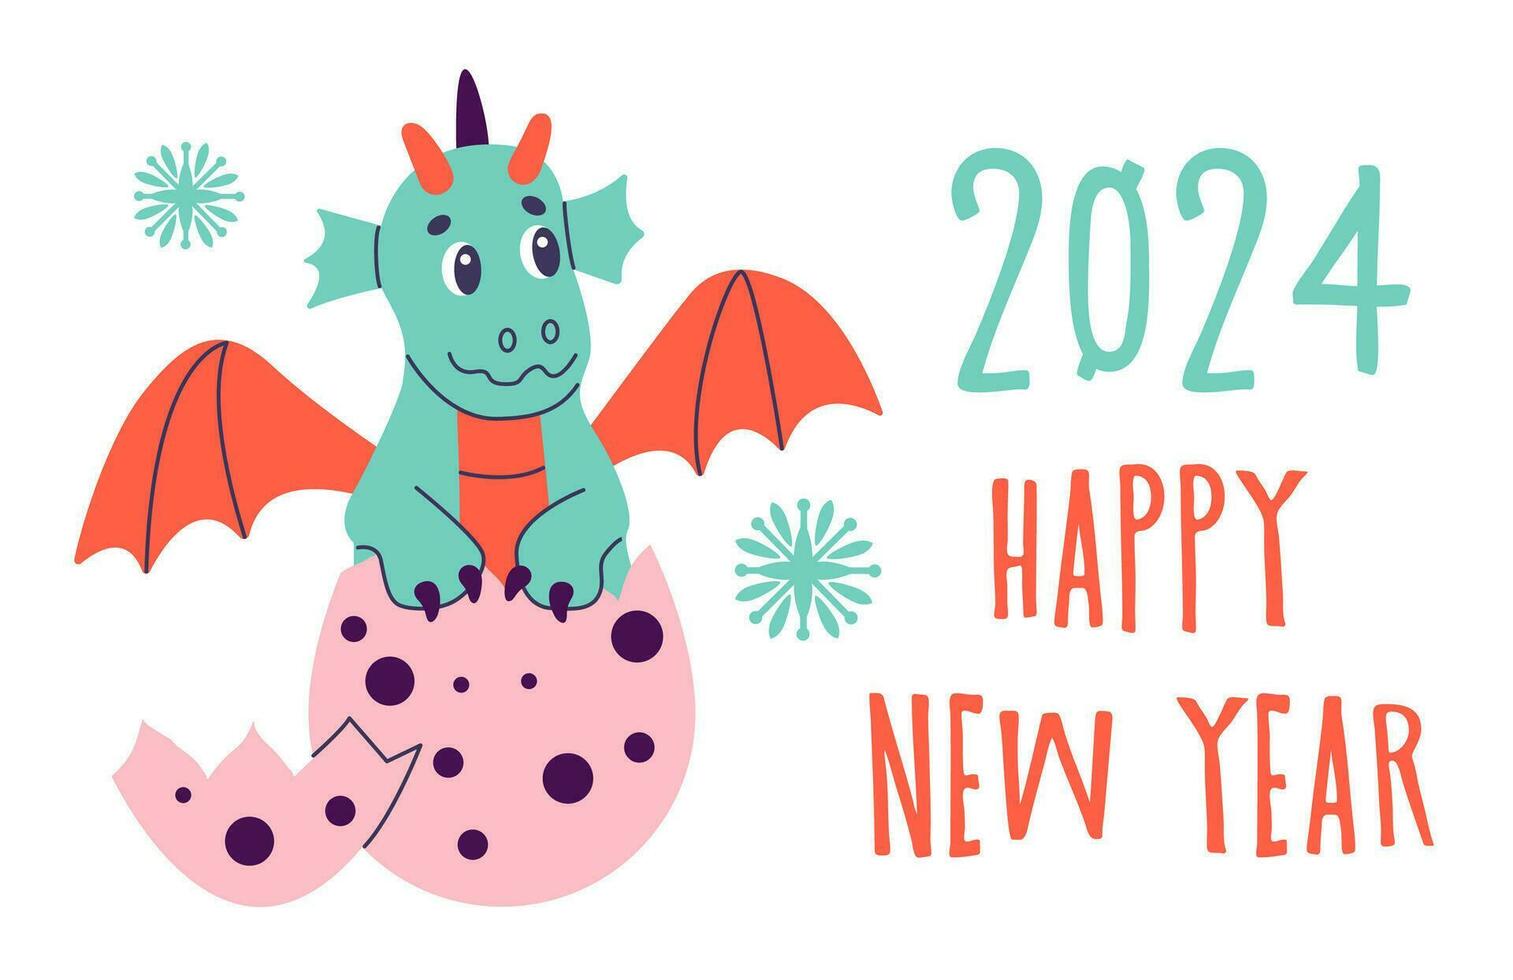 Year of Dragon, Chinese Happy New Year 2024. China lunar calendar animal. Happy Chinese new year greeting card 2024. Flat vector illustration.